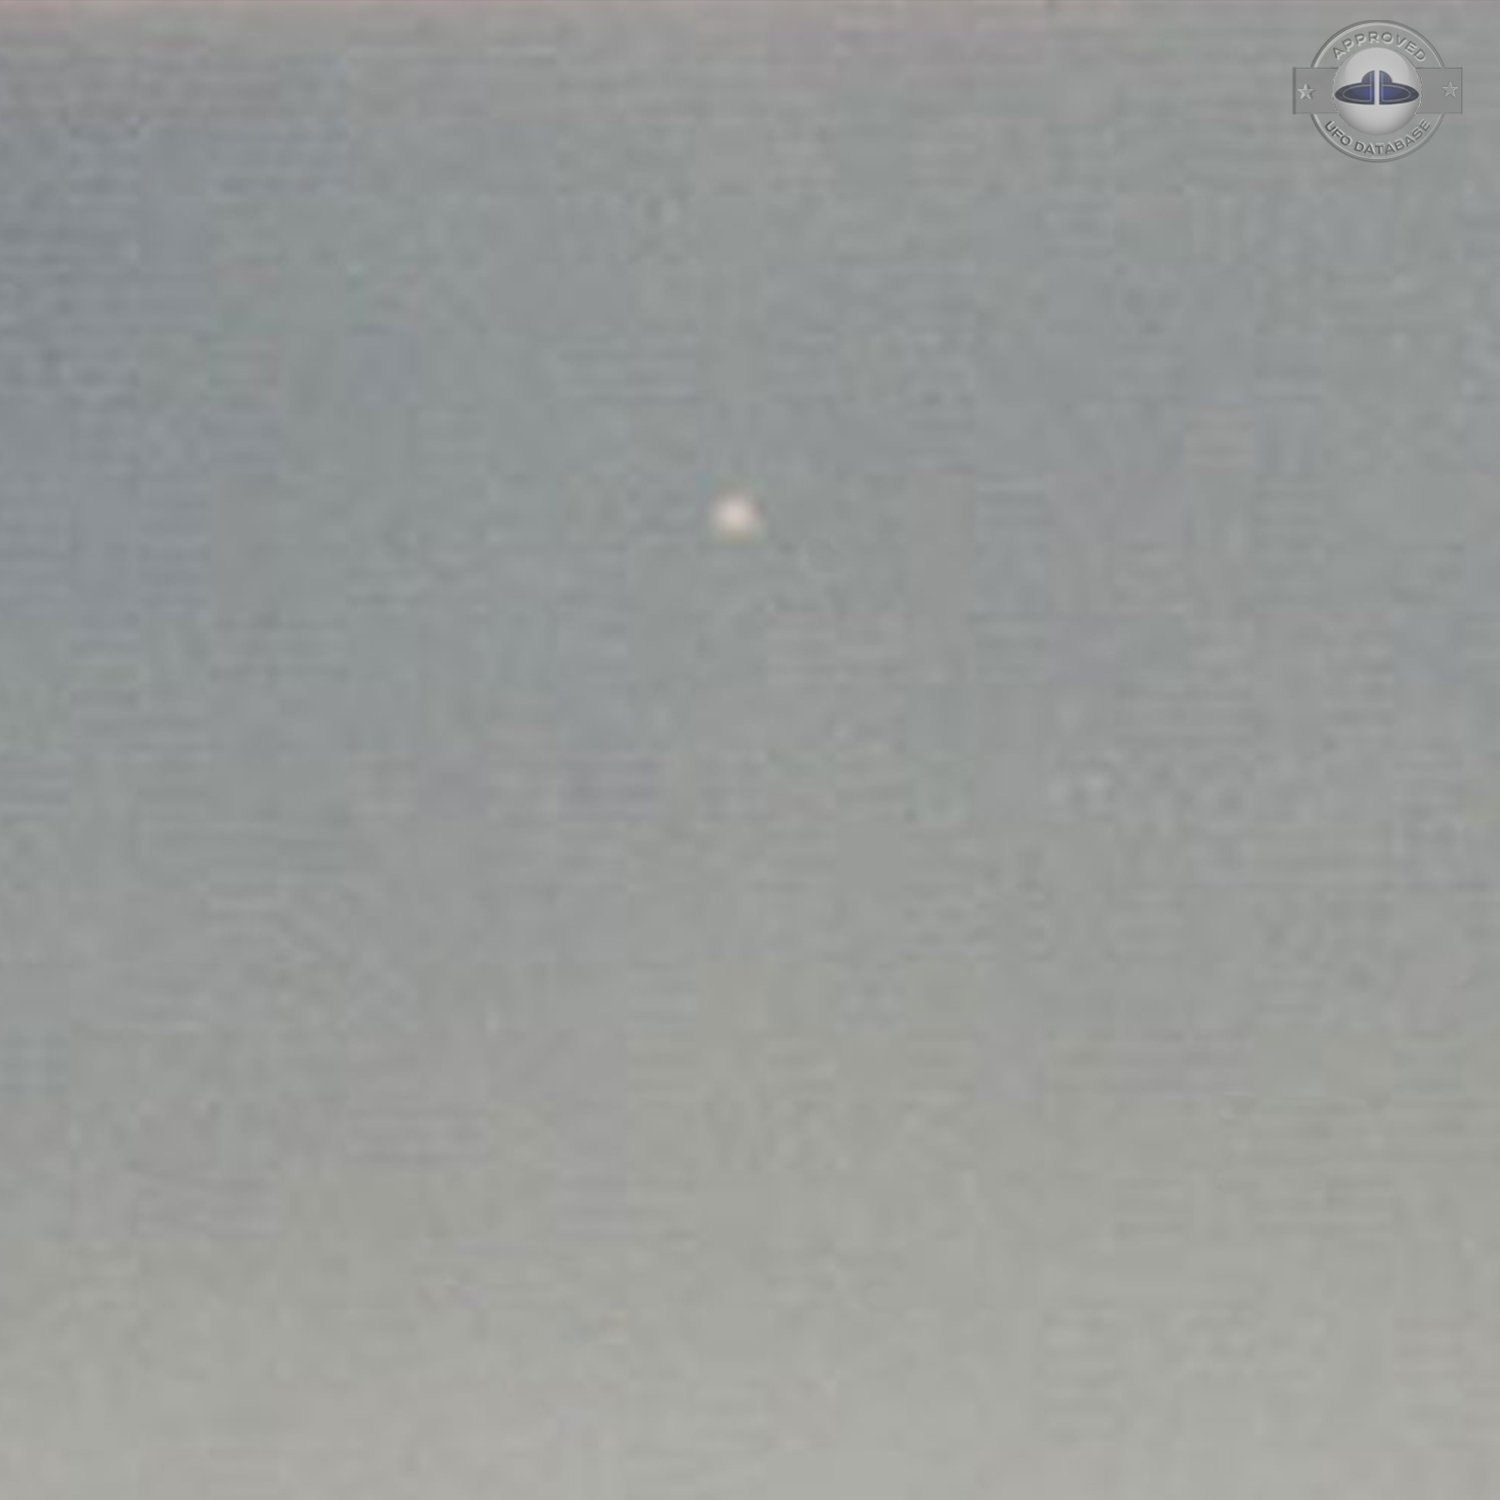 Famous Florida Uruguay UFO pictures sequence taken July 1977 UFO Picture #463-9